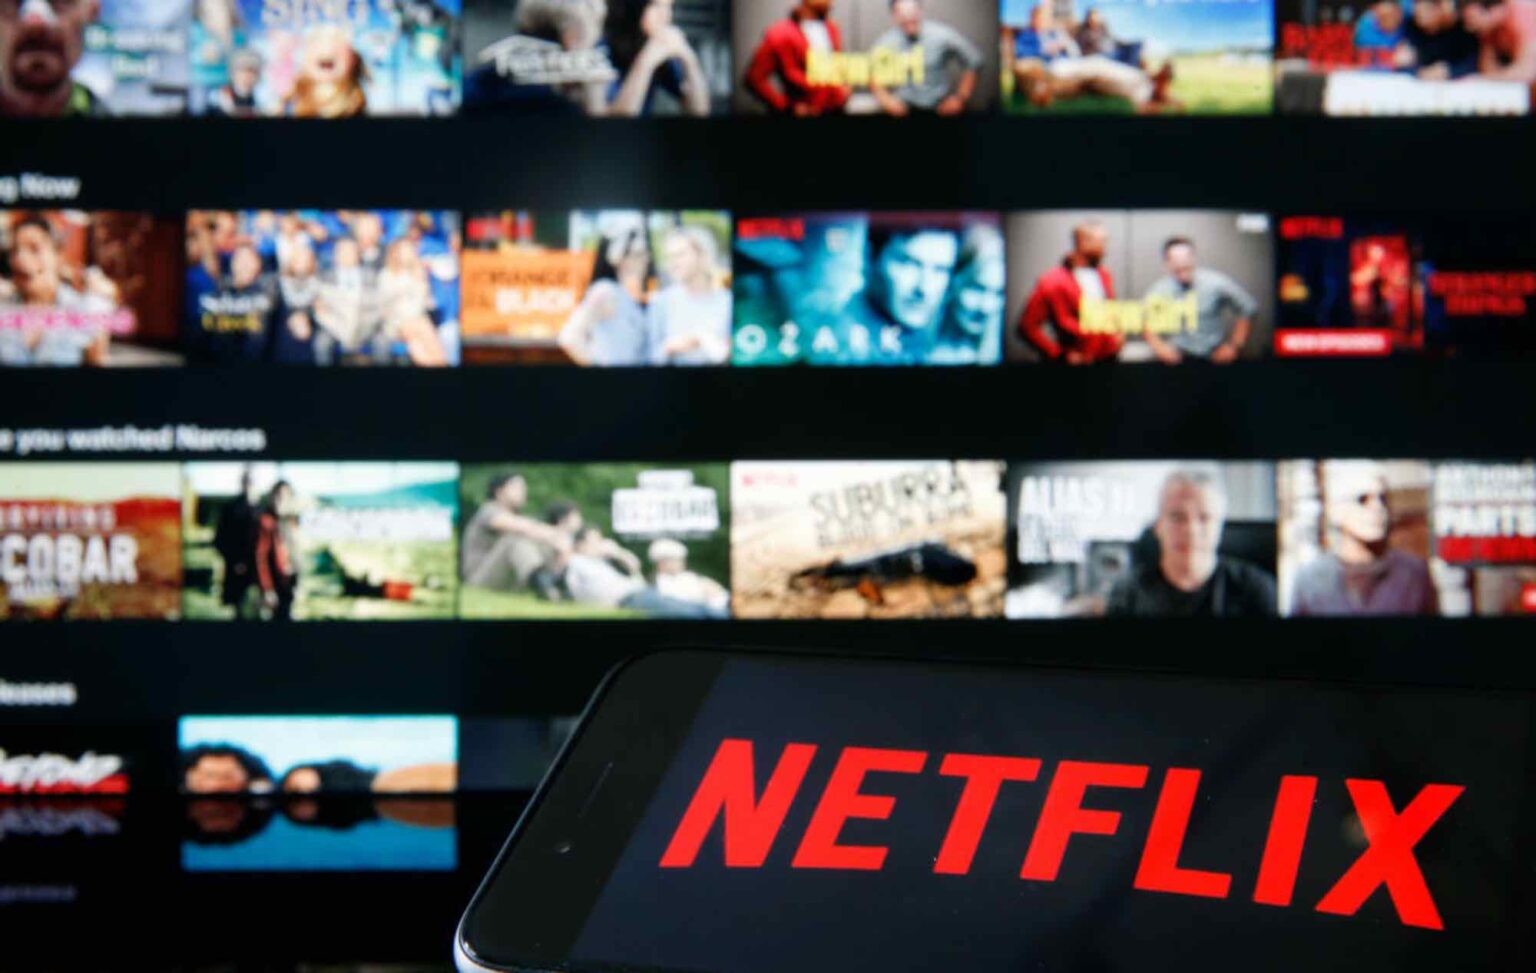 Netflix isn't offering free trials right now. Here are streaming services you can use instead without having to spend a monthly fee.